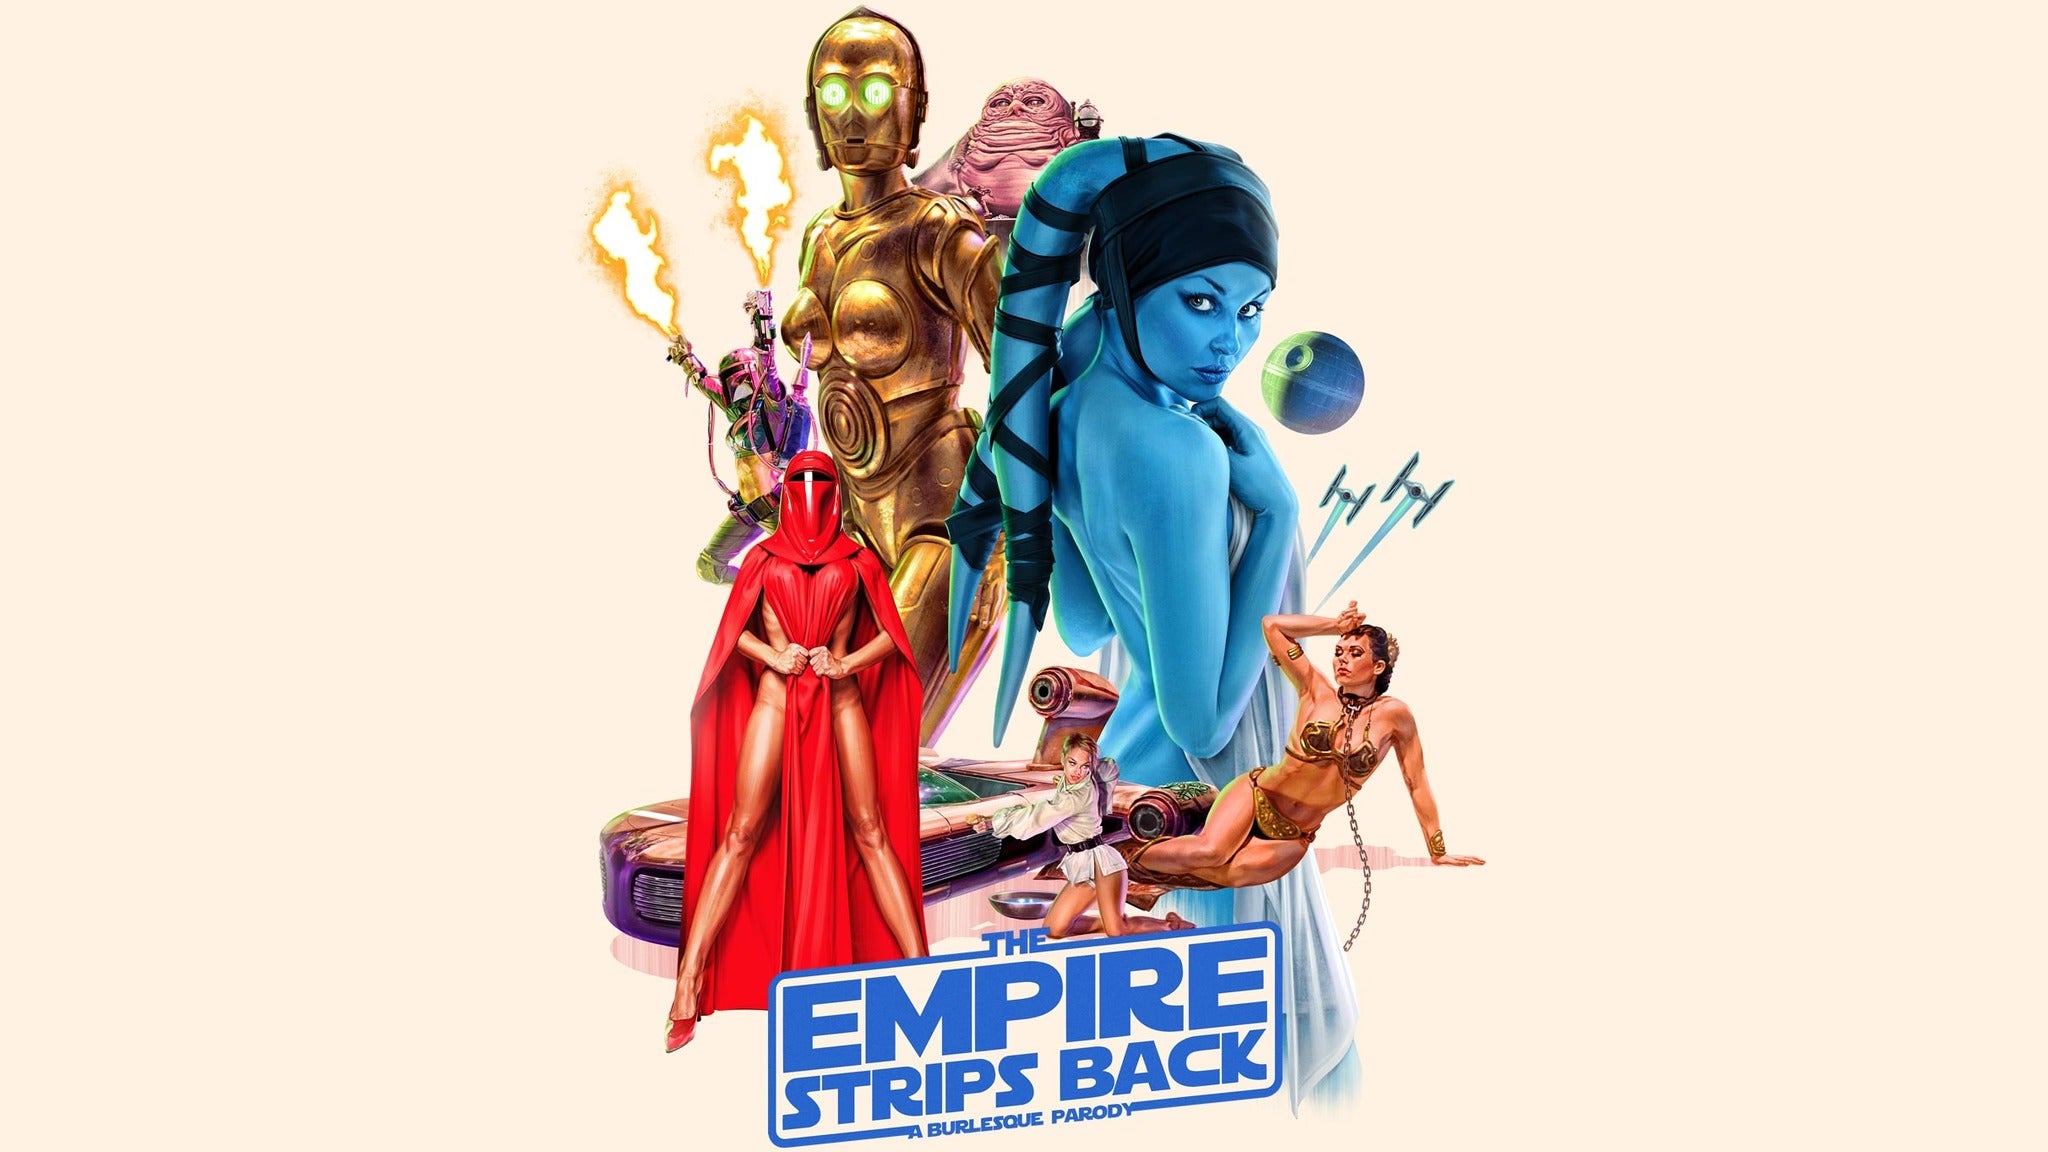 The Empire Strips Back: A Burlesque Parody in Los Angeles promo photo for Live Nation presale offer code